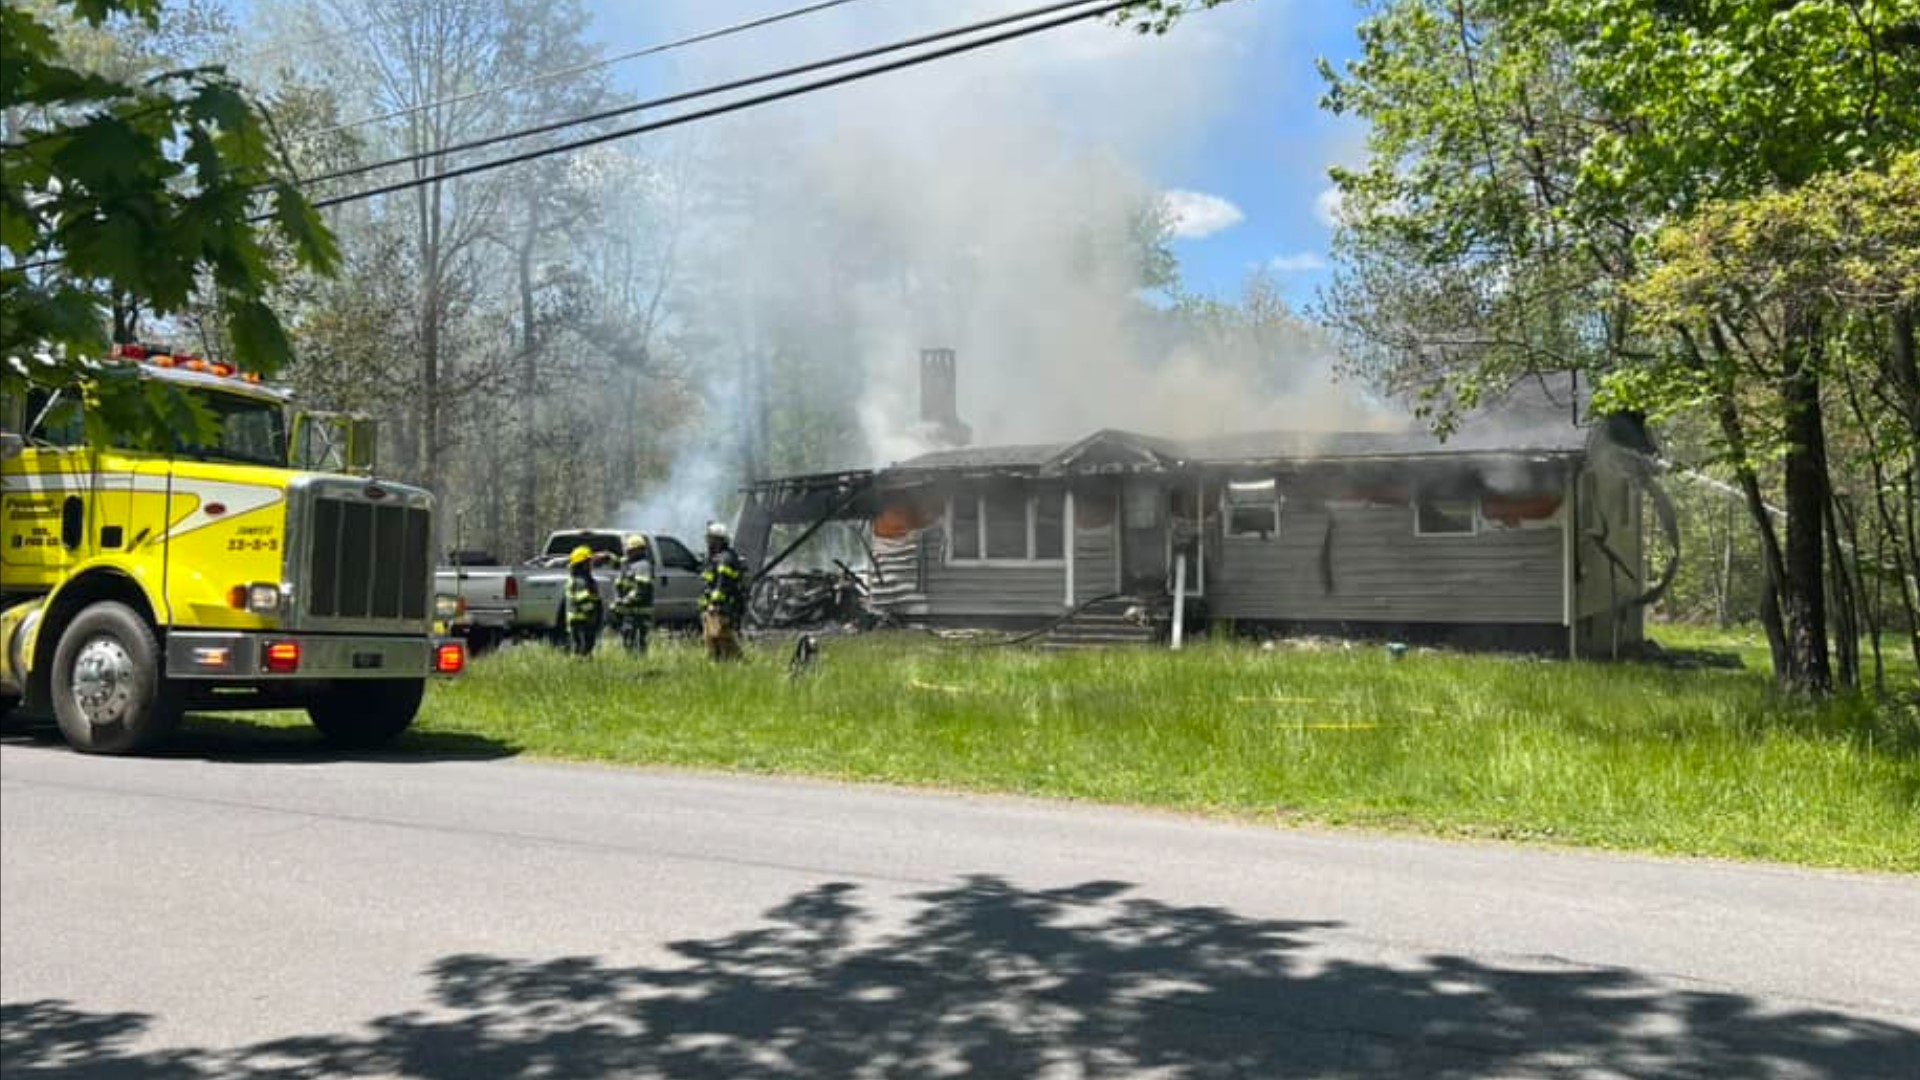 The fire started around noon Friday at a home near Pocono Summit.